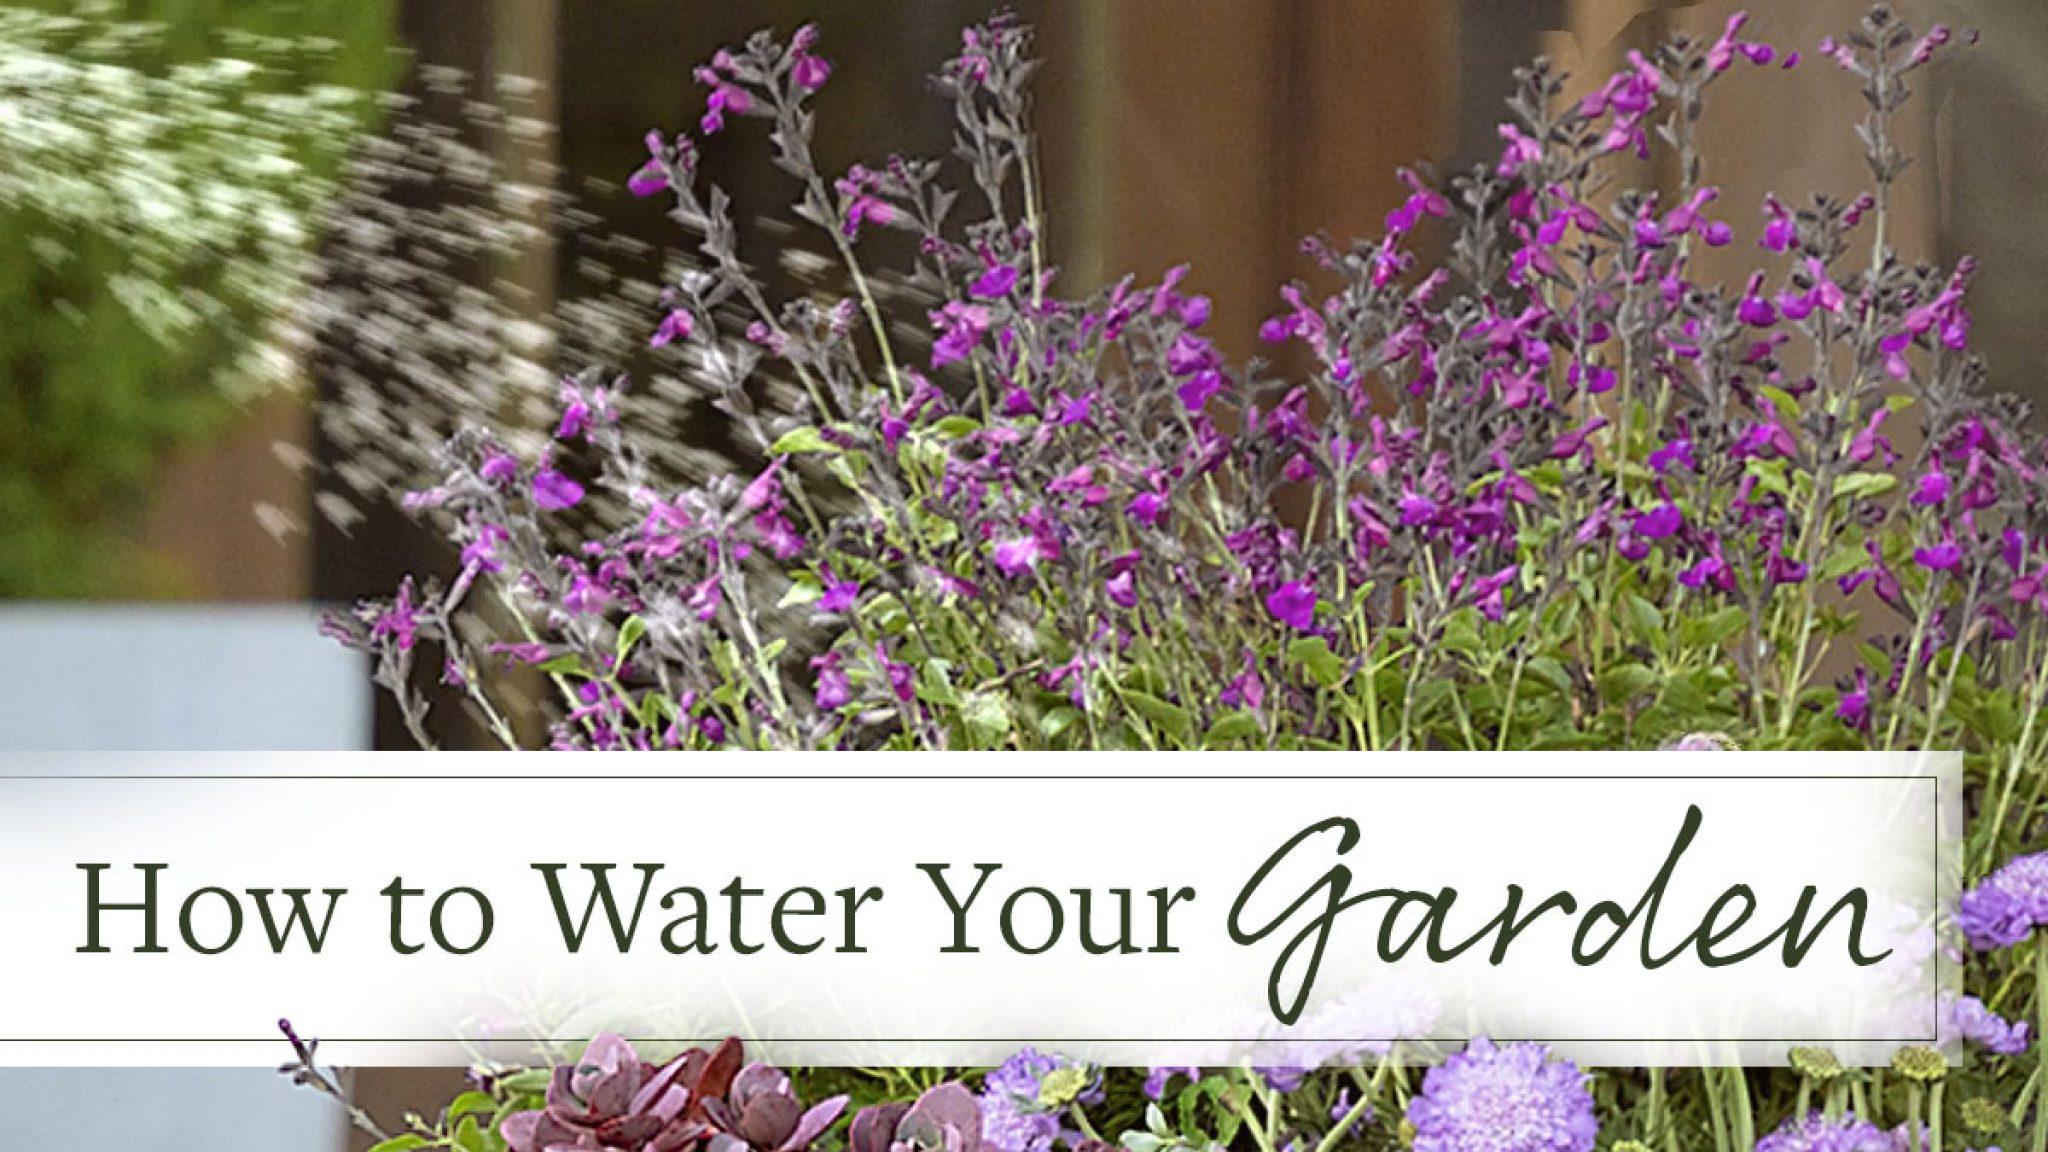 How to Water Your Garden to Keep Your Plants Healthy